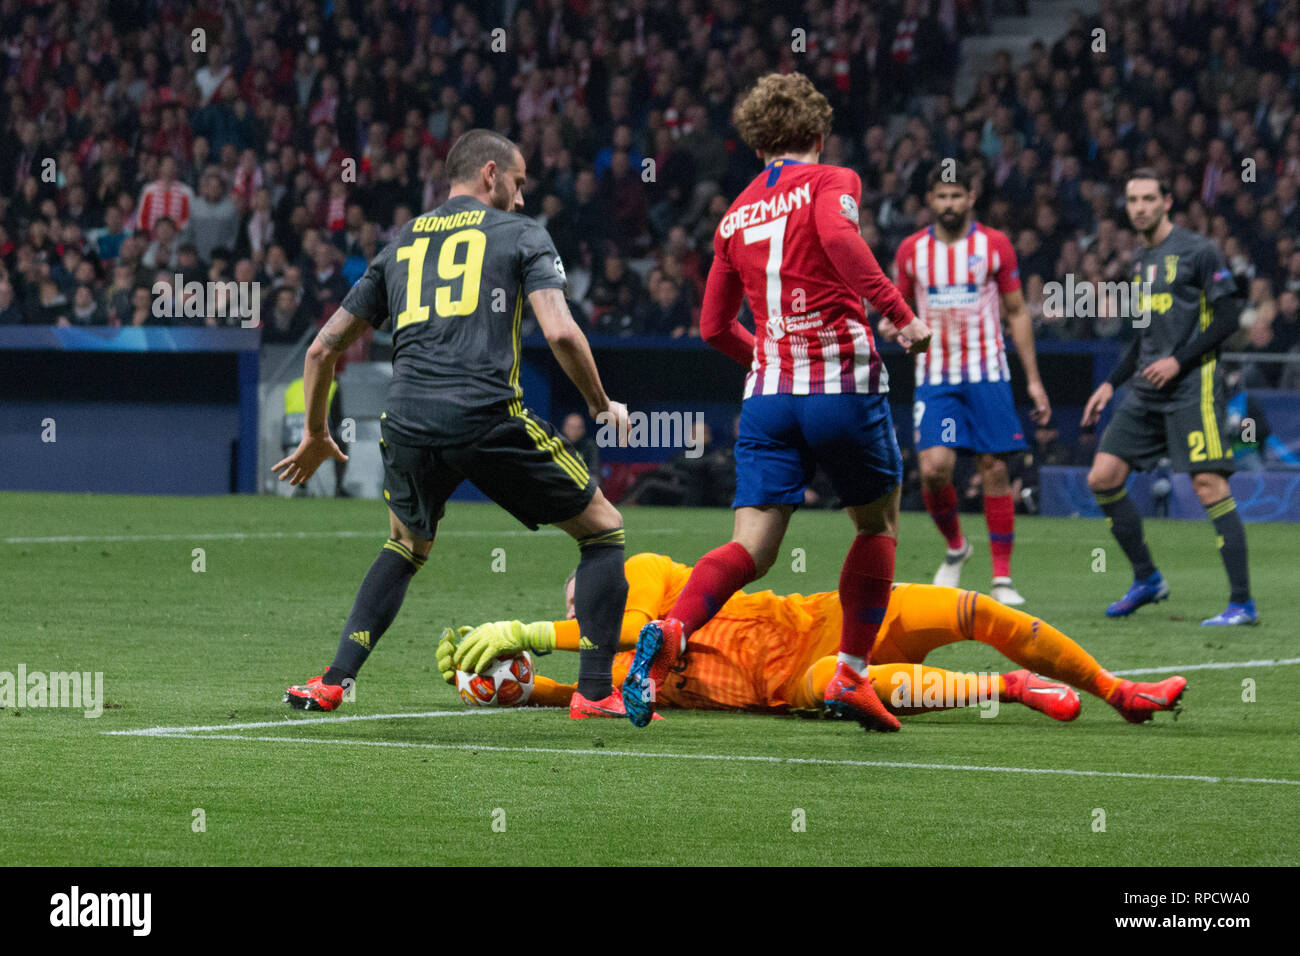 Madrid, Spain. 20th Feb, 2019. During the match between Atletico de Madrid and . Juventus . Atletico de Madrid wons 2 to 0 over Juventus with the goals of Gimenez and Godin. Credit: Jorge Gonzalez/Pacific Press/Alamy Live News Stock Photo